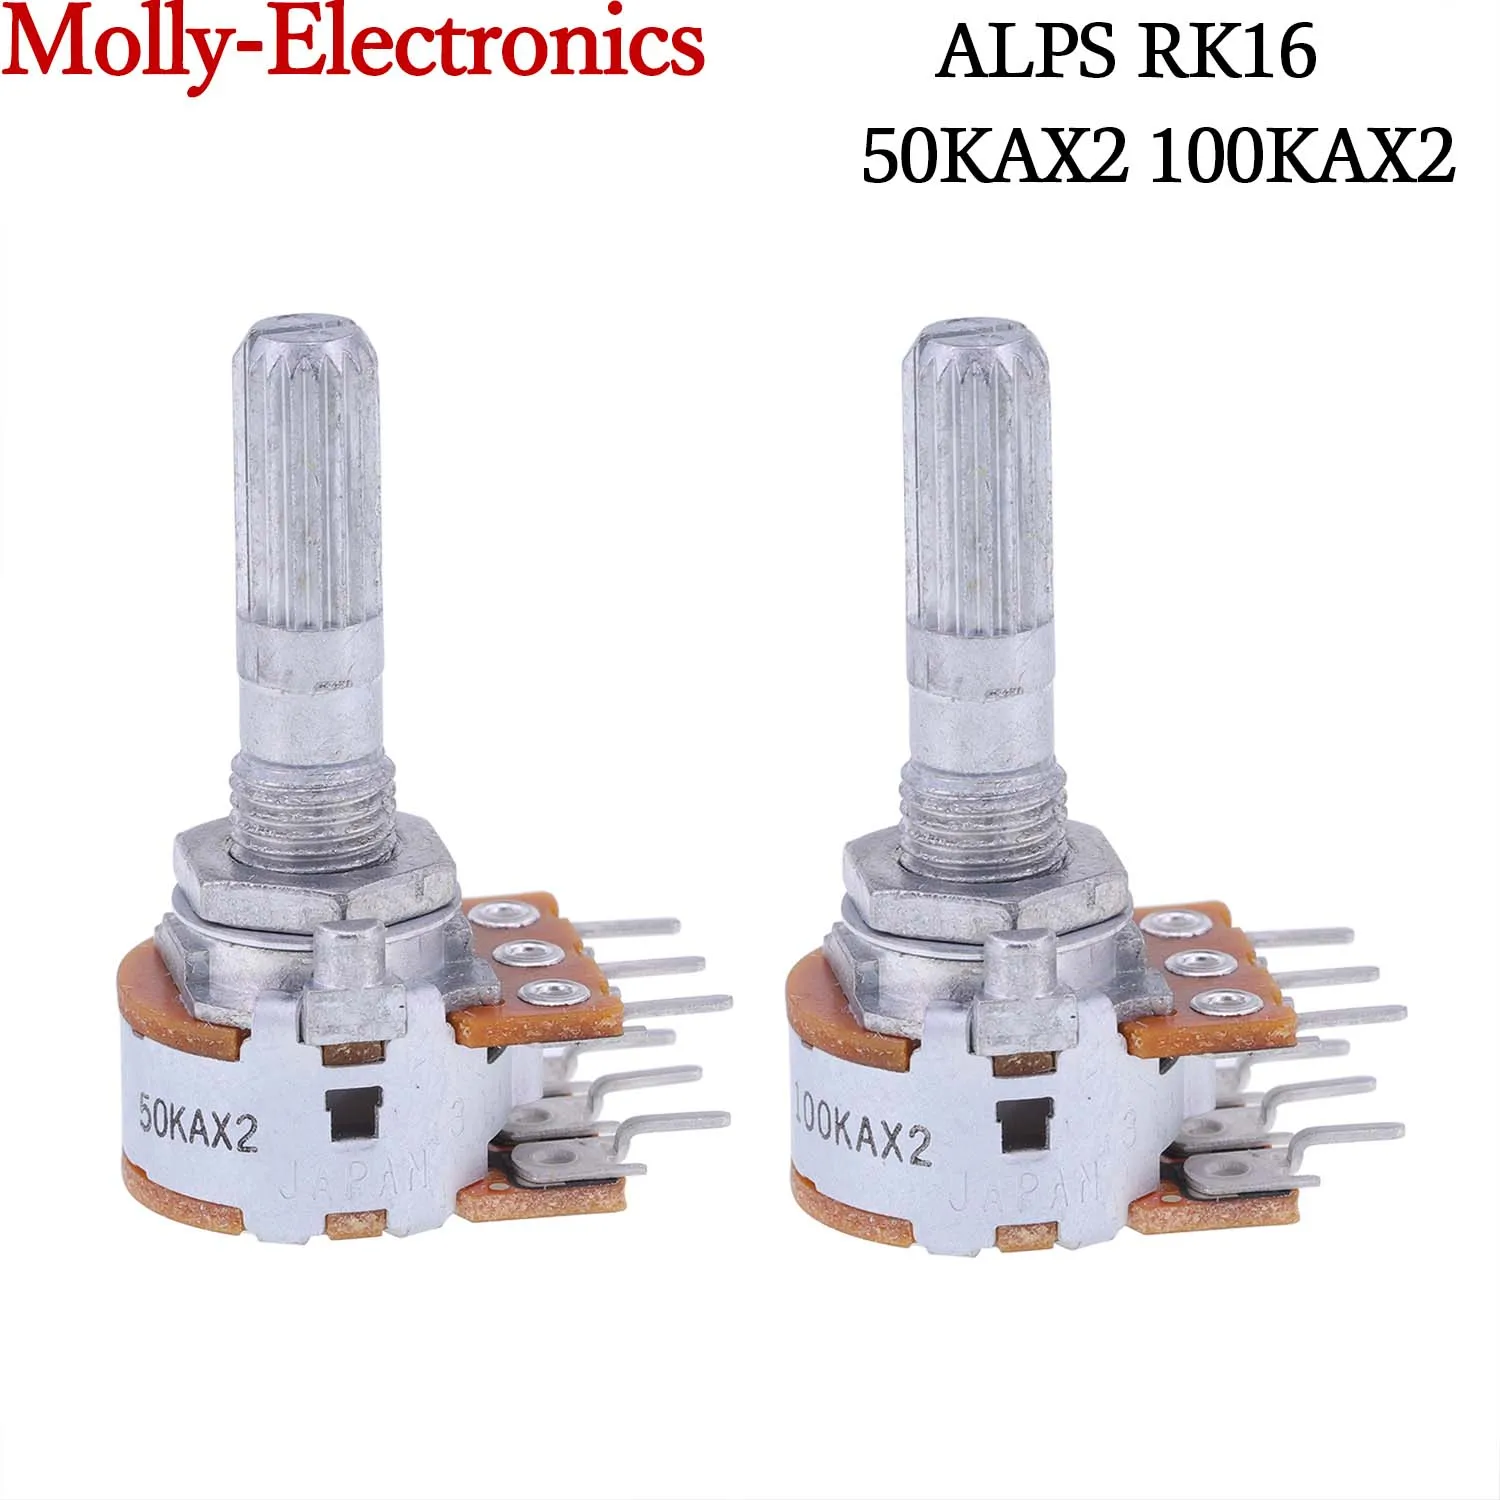 1PC ALPS Volume Potentiometer RK16 100KA 50KA ±20% 6mm Knurled Shaft Attenuator Stereo For CD DAC Hifi Audio Amplifier solupeak as1 audio signal switcher 4 input 1 out or 1 in 4 out hifi stereo rca switch splitter selector box for amplifier